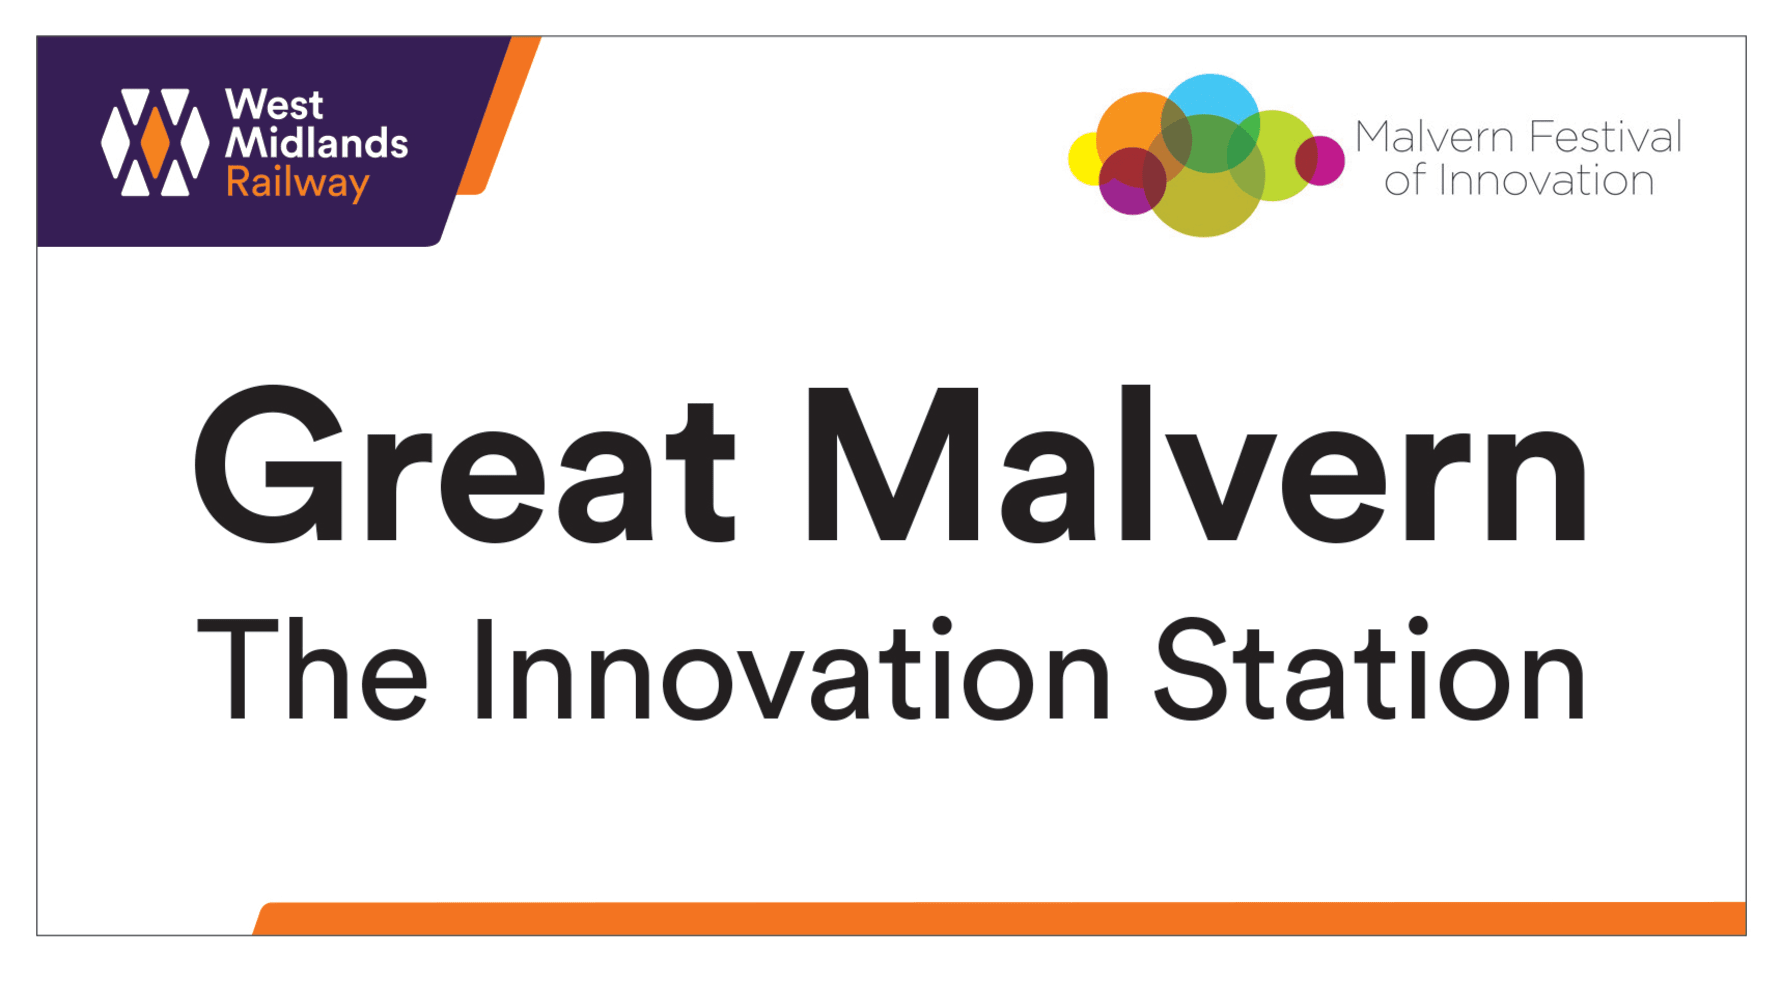 West Midlands Railway partners with Malvern Festival of Innovation